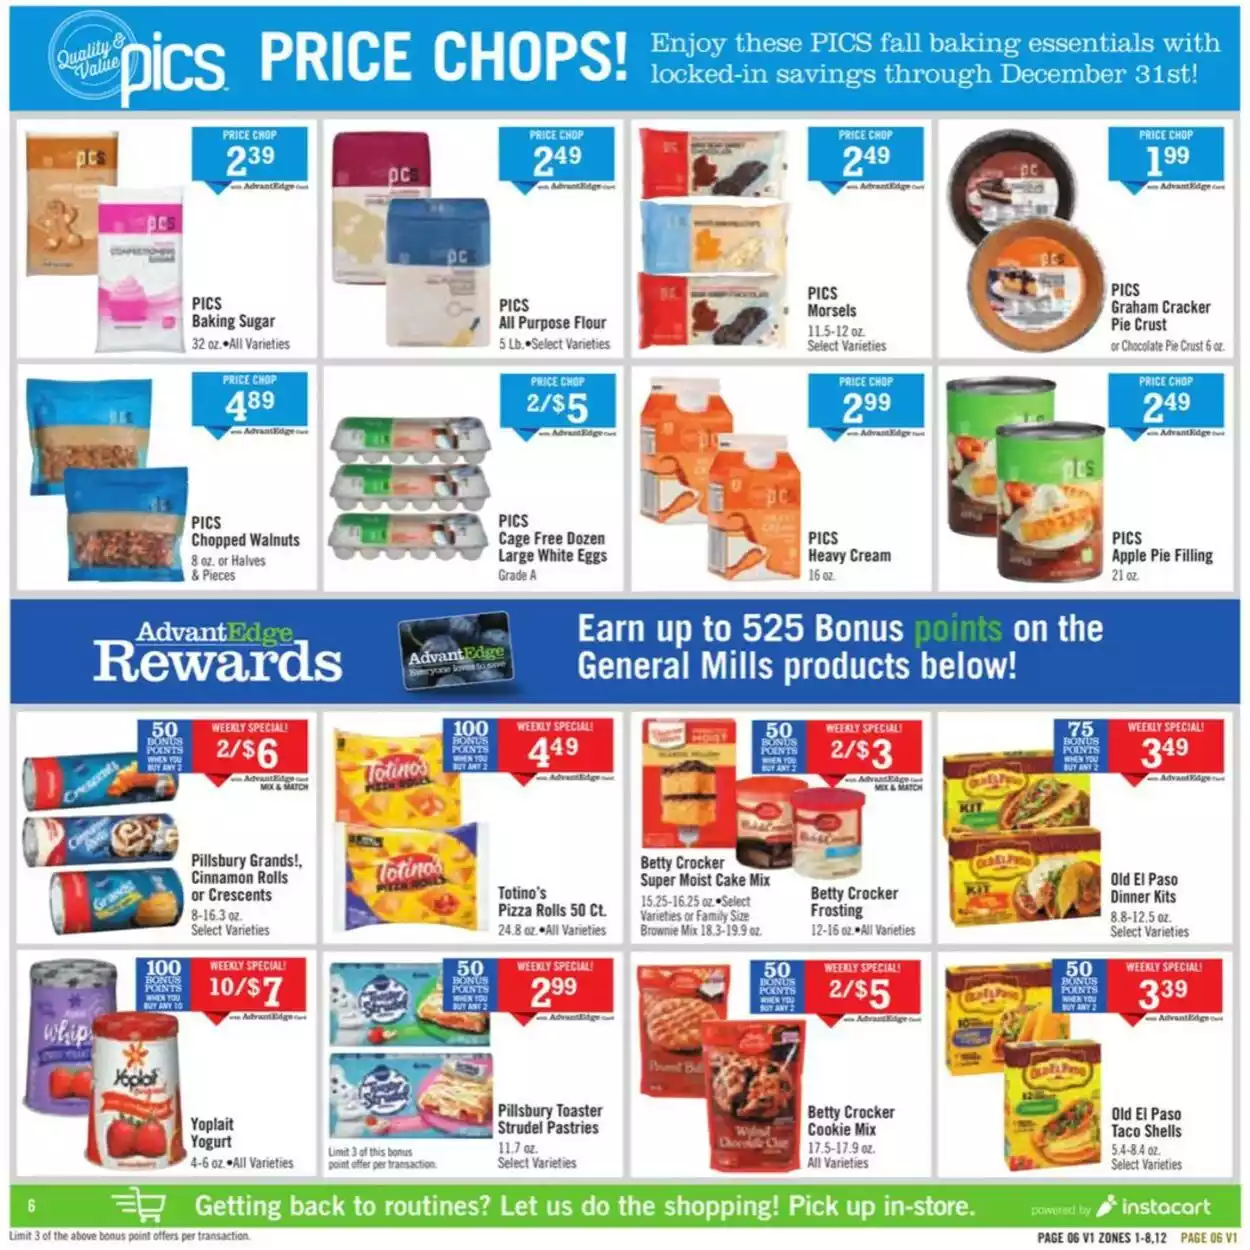 Price Chopper Weekly Ad Preview for March 26 - April 1, 2023 3